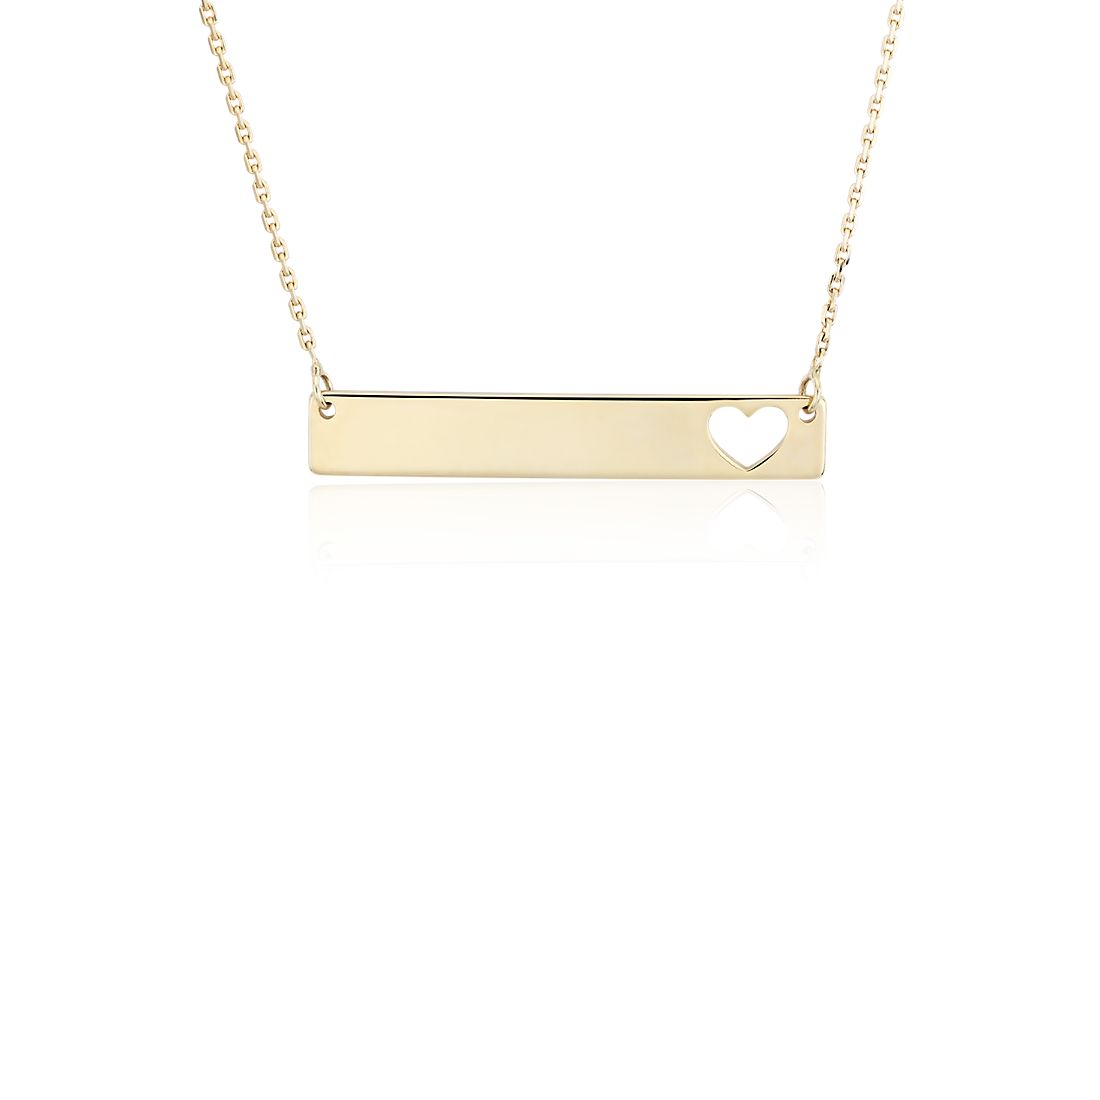 Mini Horizontal Bar Necklace with Heart Cut Out in 14k Yellow Gold